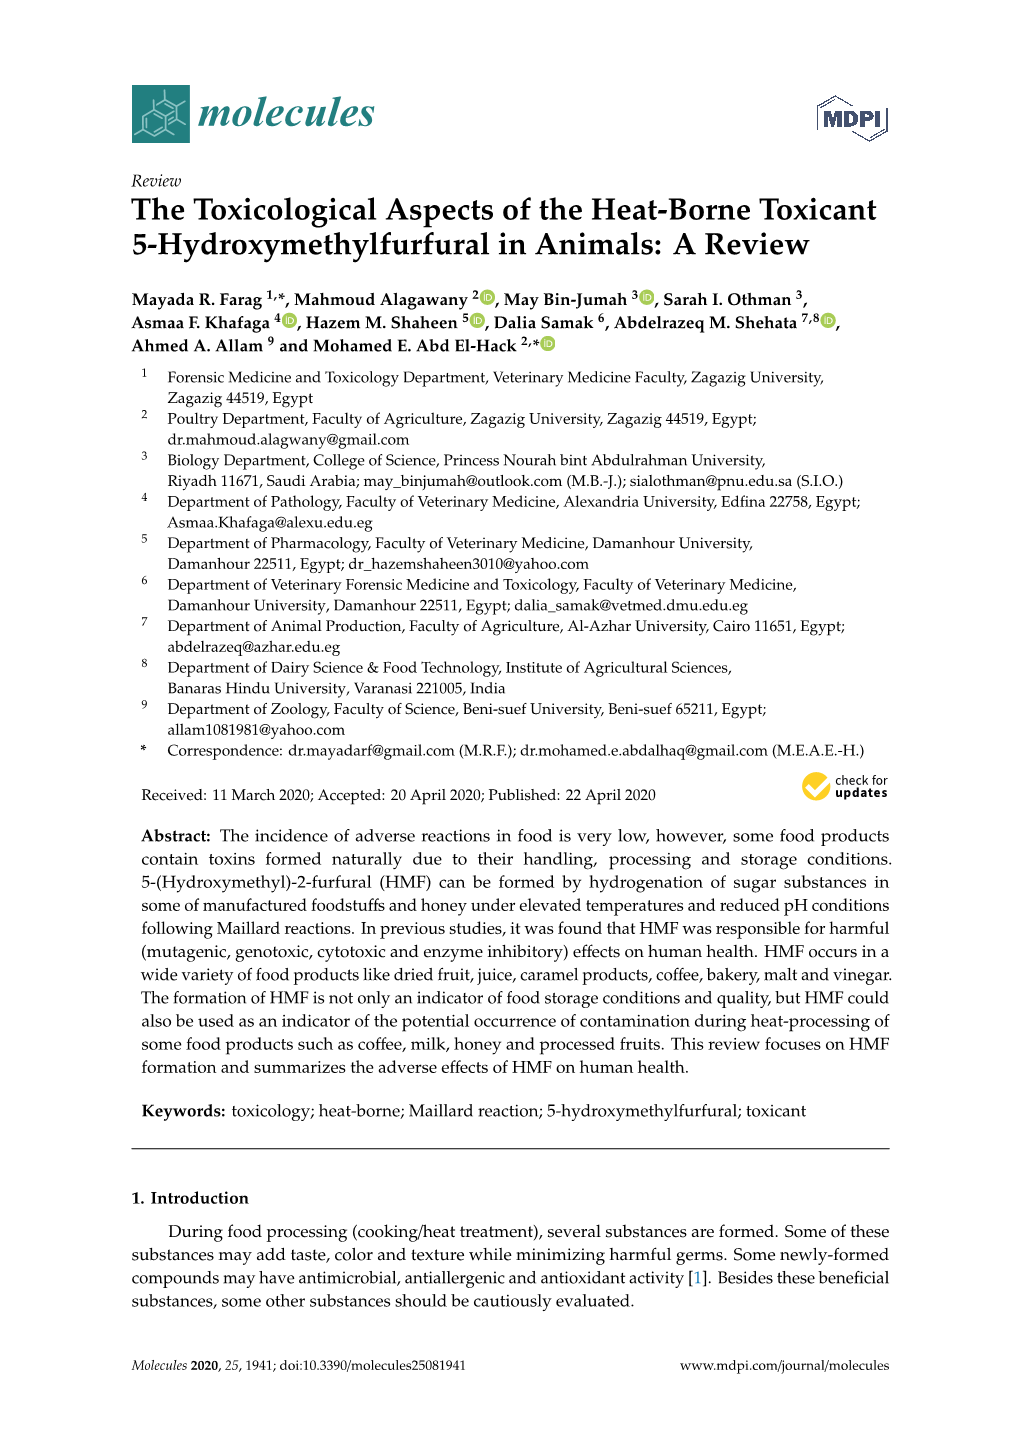 The Toxicological Aspects of the Heat-Borne Toxicant 5-Hydroxymethylfurfural in Animals: a Review